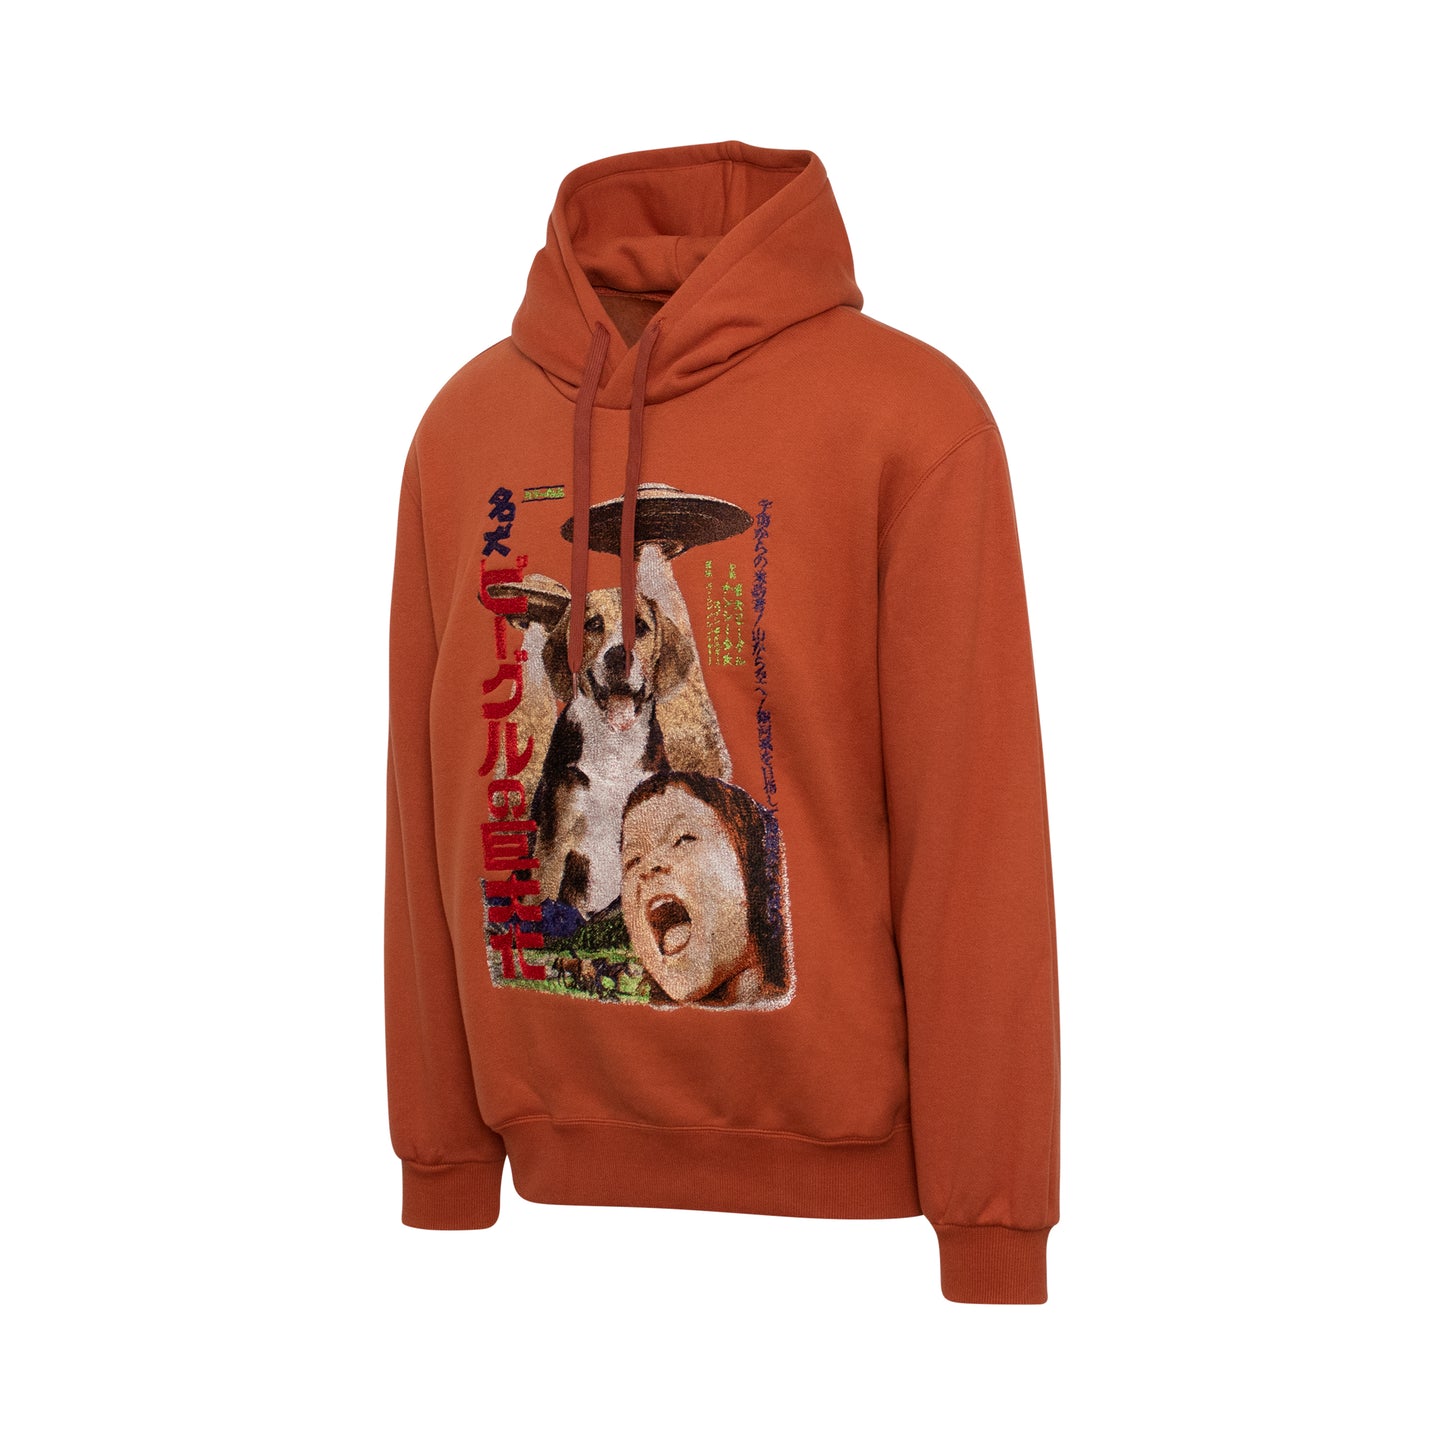 Retro Poster Embroidery Hoodie in Brown